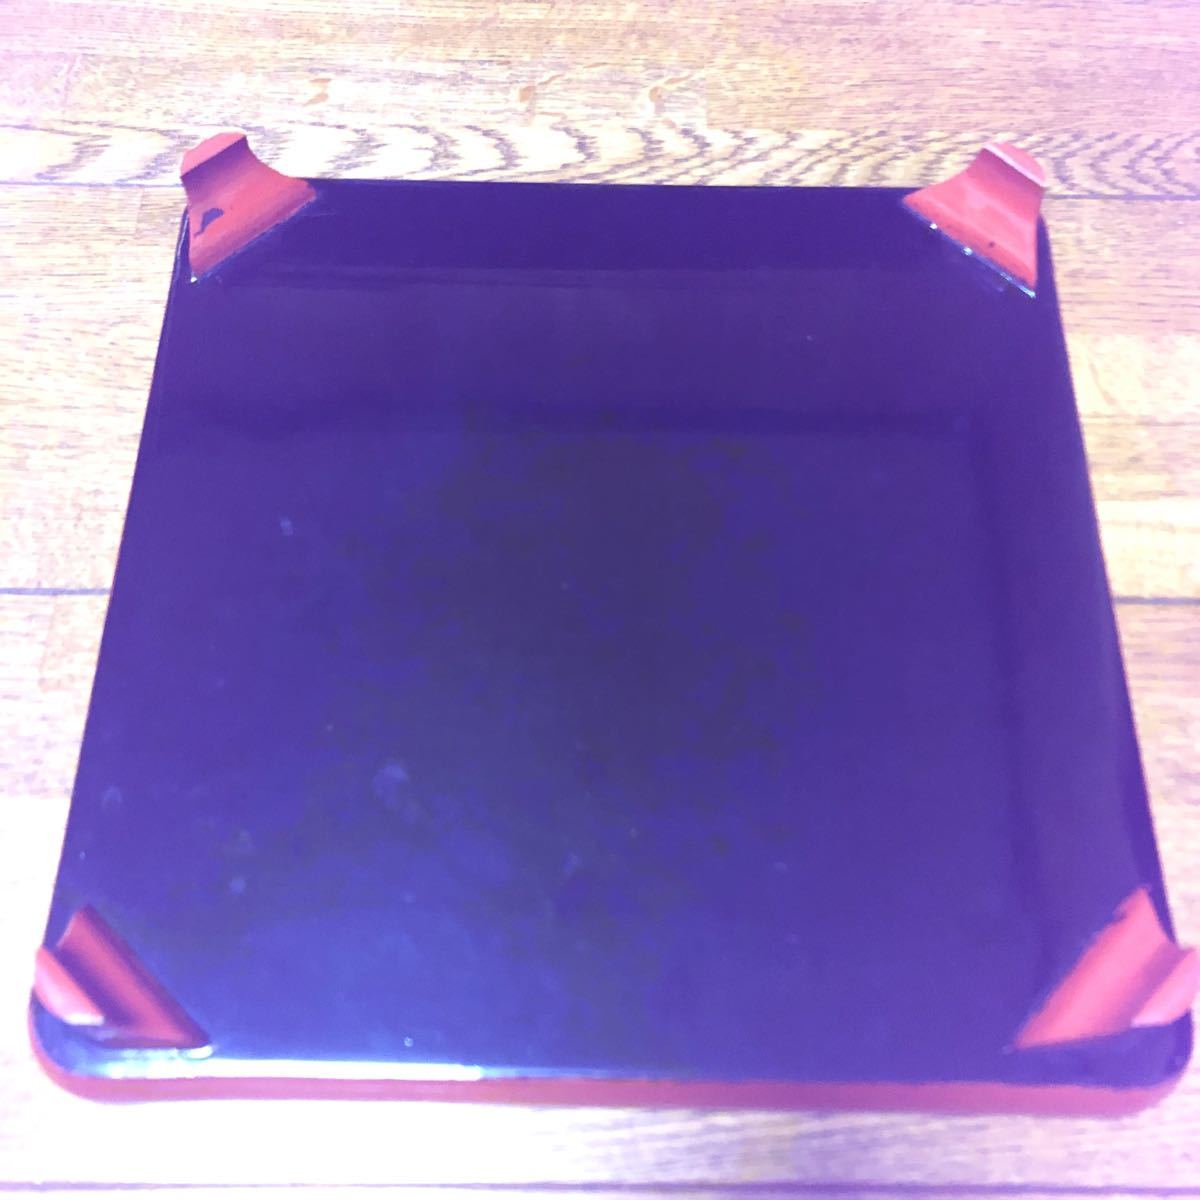 o serving tray lacquer ware wooden . coating pine bamboo plum house . entering 